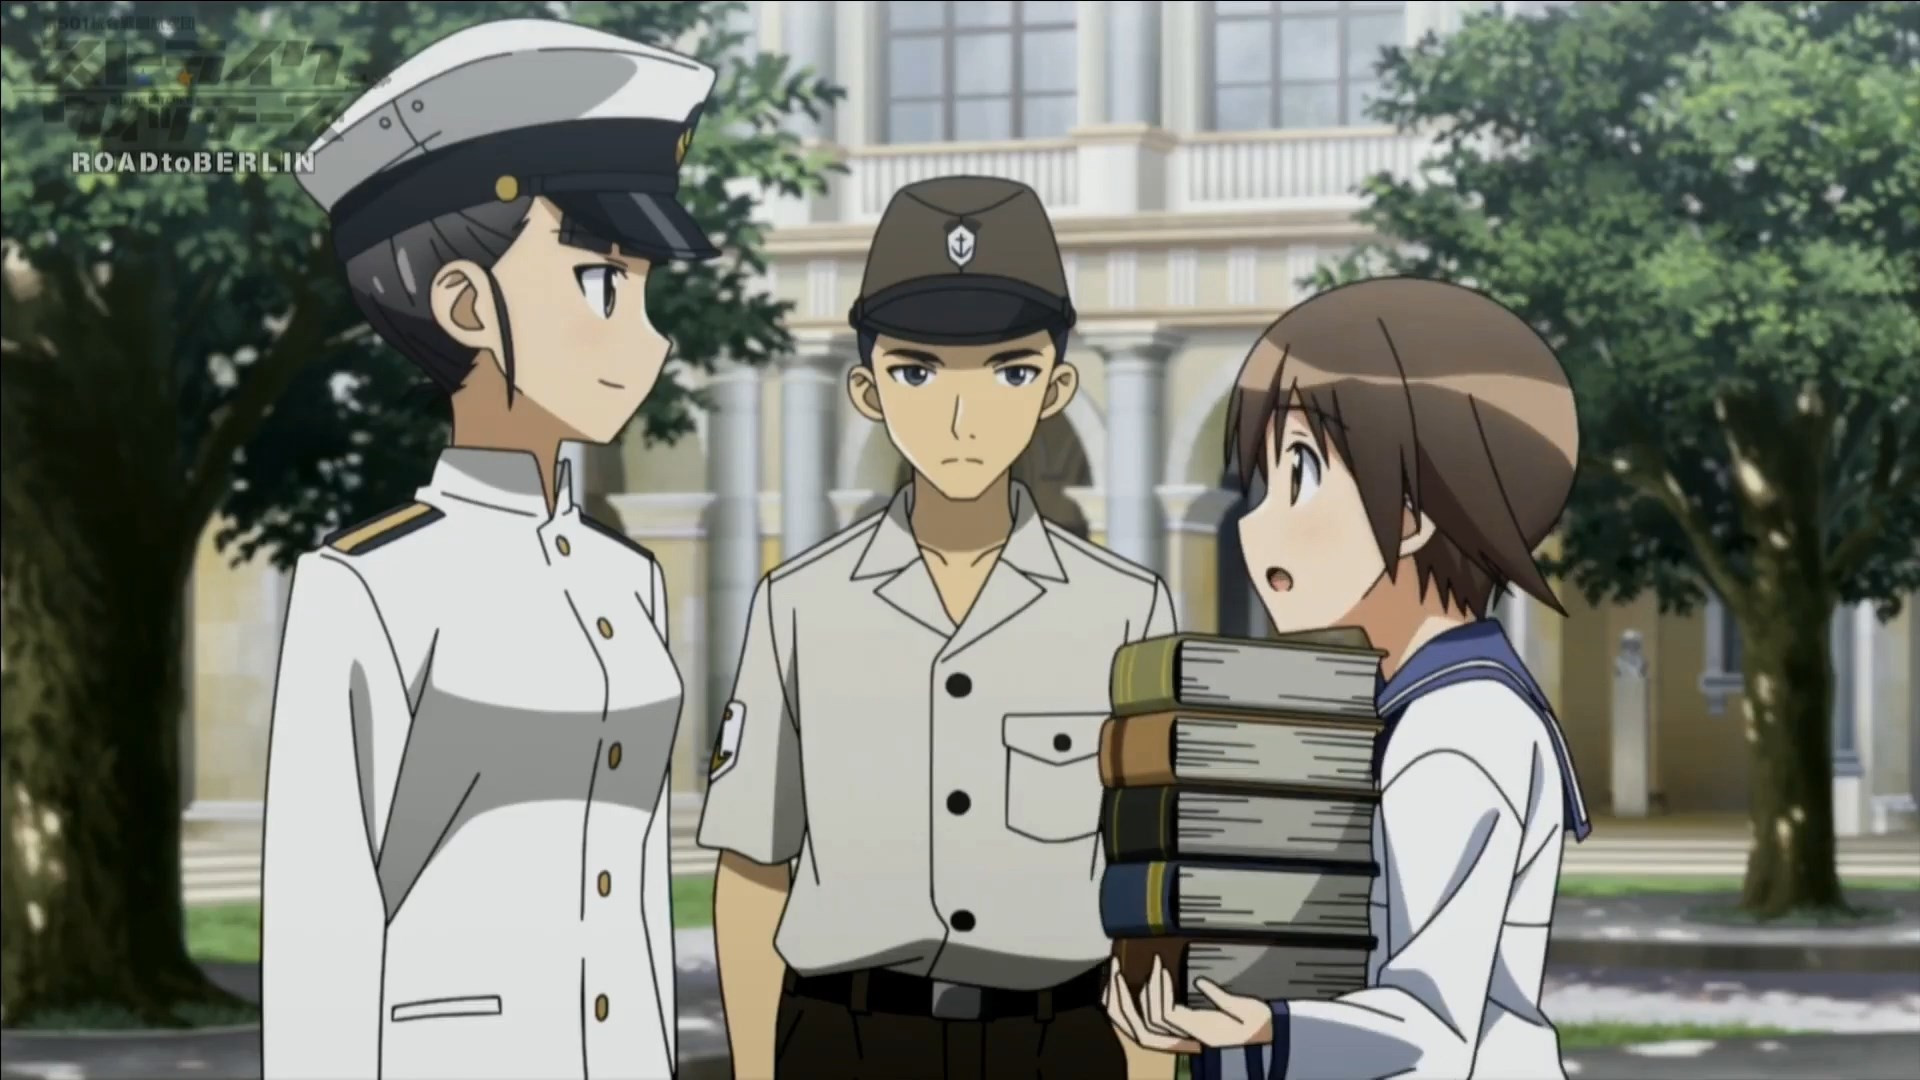 Strike Witches: Road to Berlin - 01 - Random Curiosity